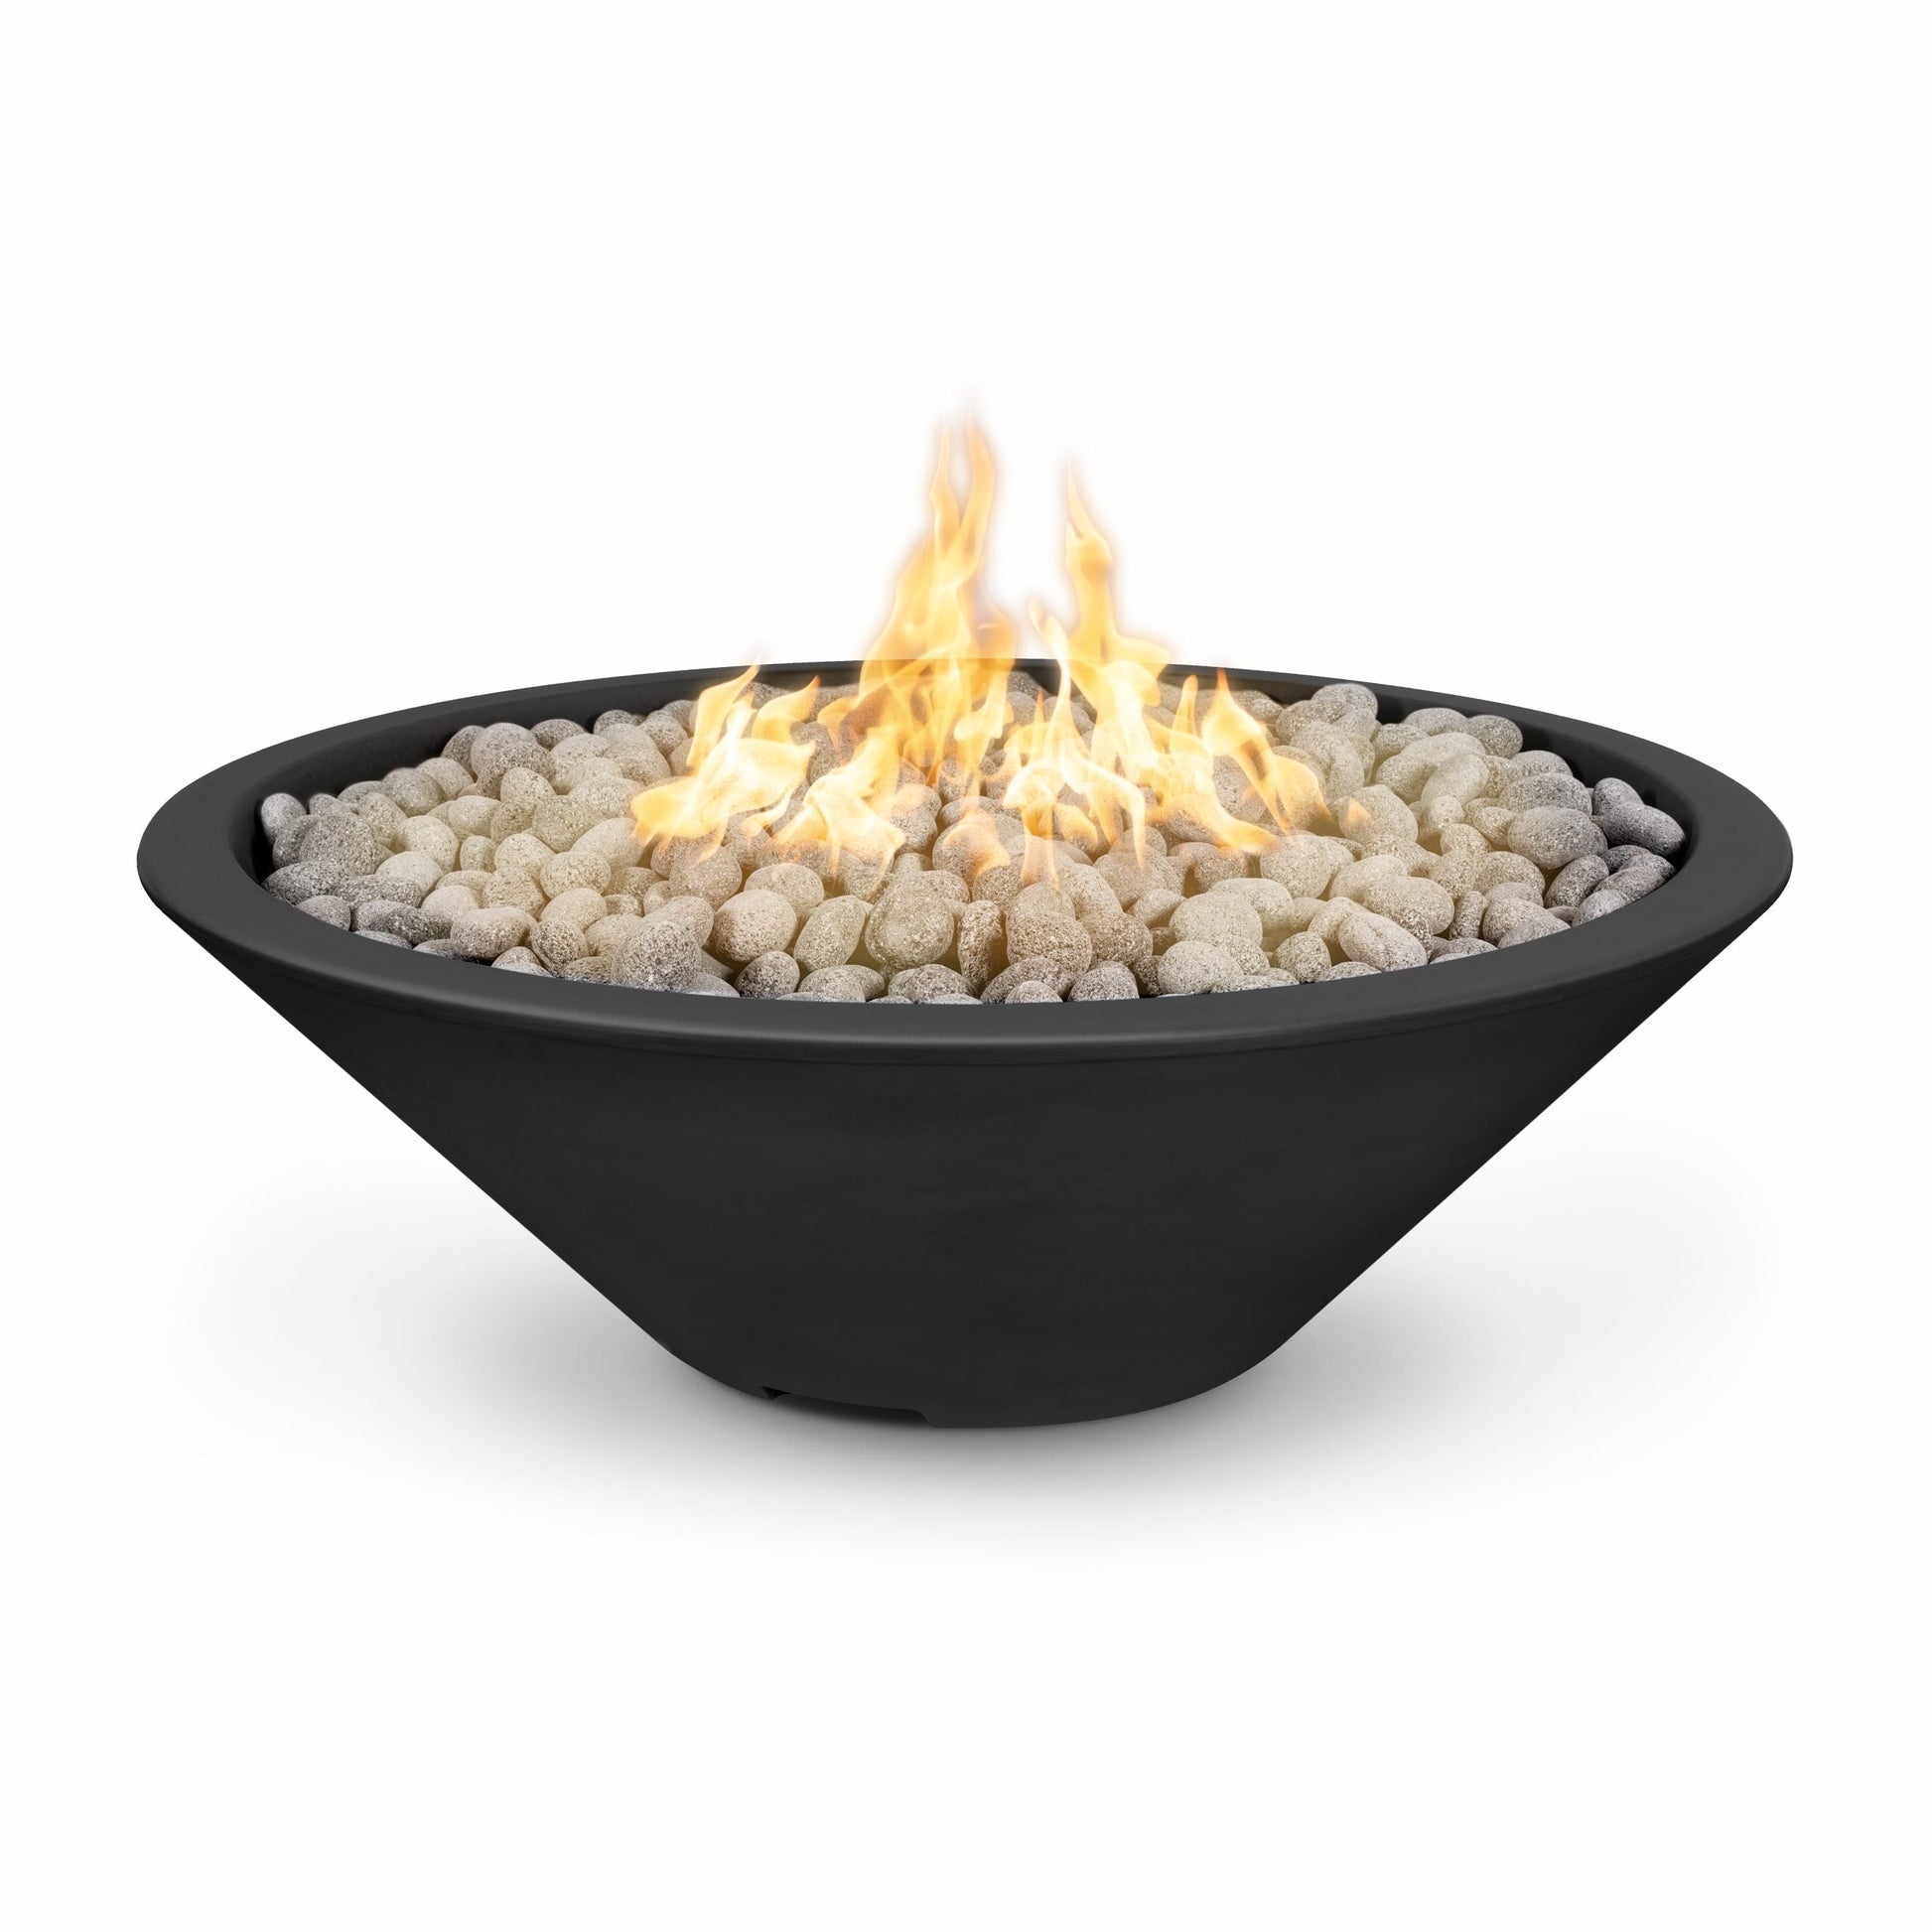 The Outdoor Plus Round Cazo 48" Java Powder Coated Metal Liquid Propane Fire Pit with 110V Electronic Ignition